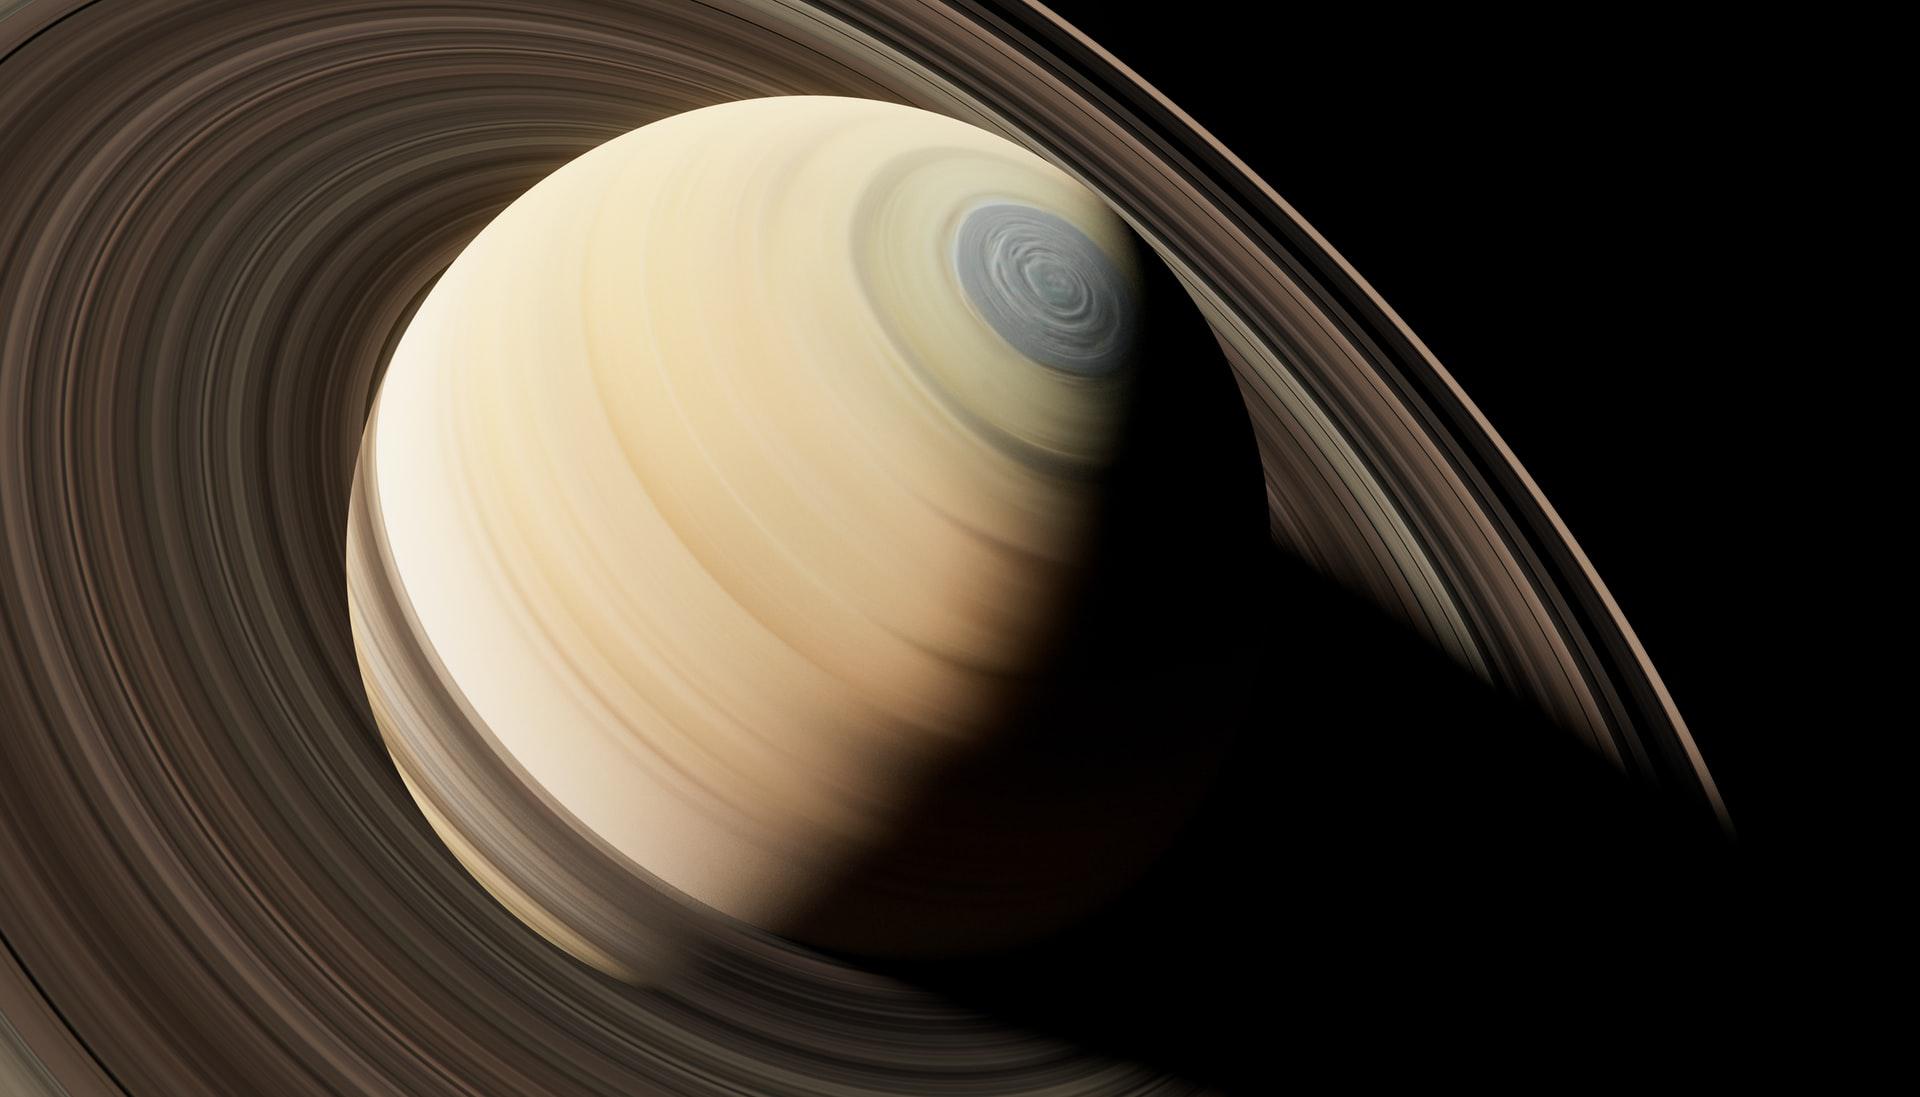 Saturn is famous for its rings (Source: Unplash/Planet Volumes)